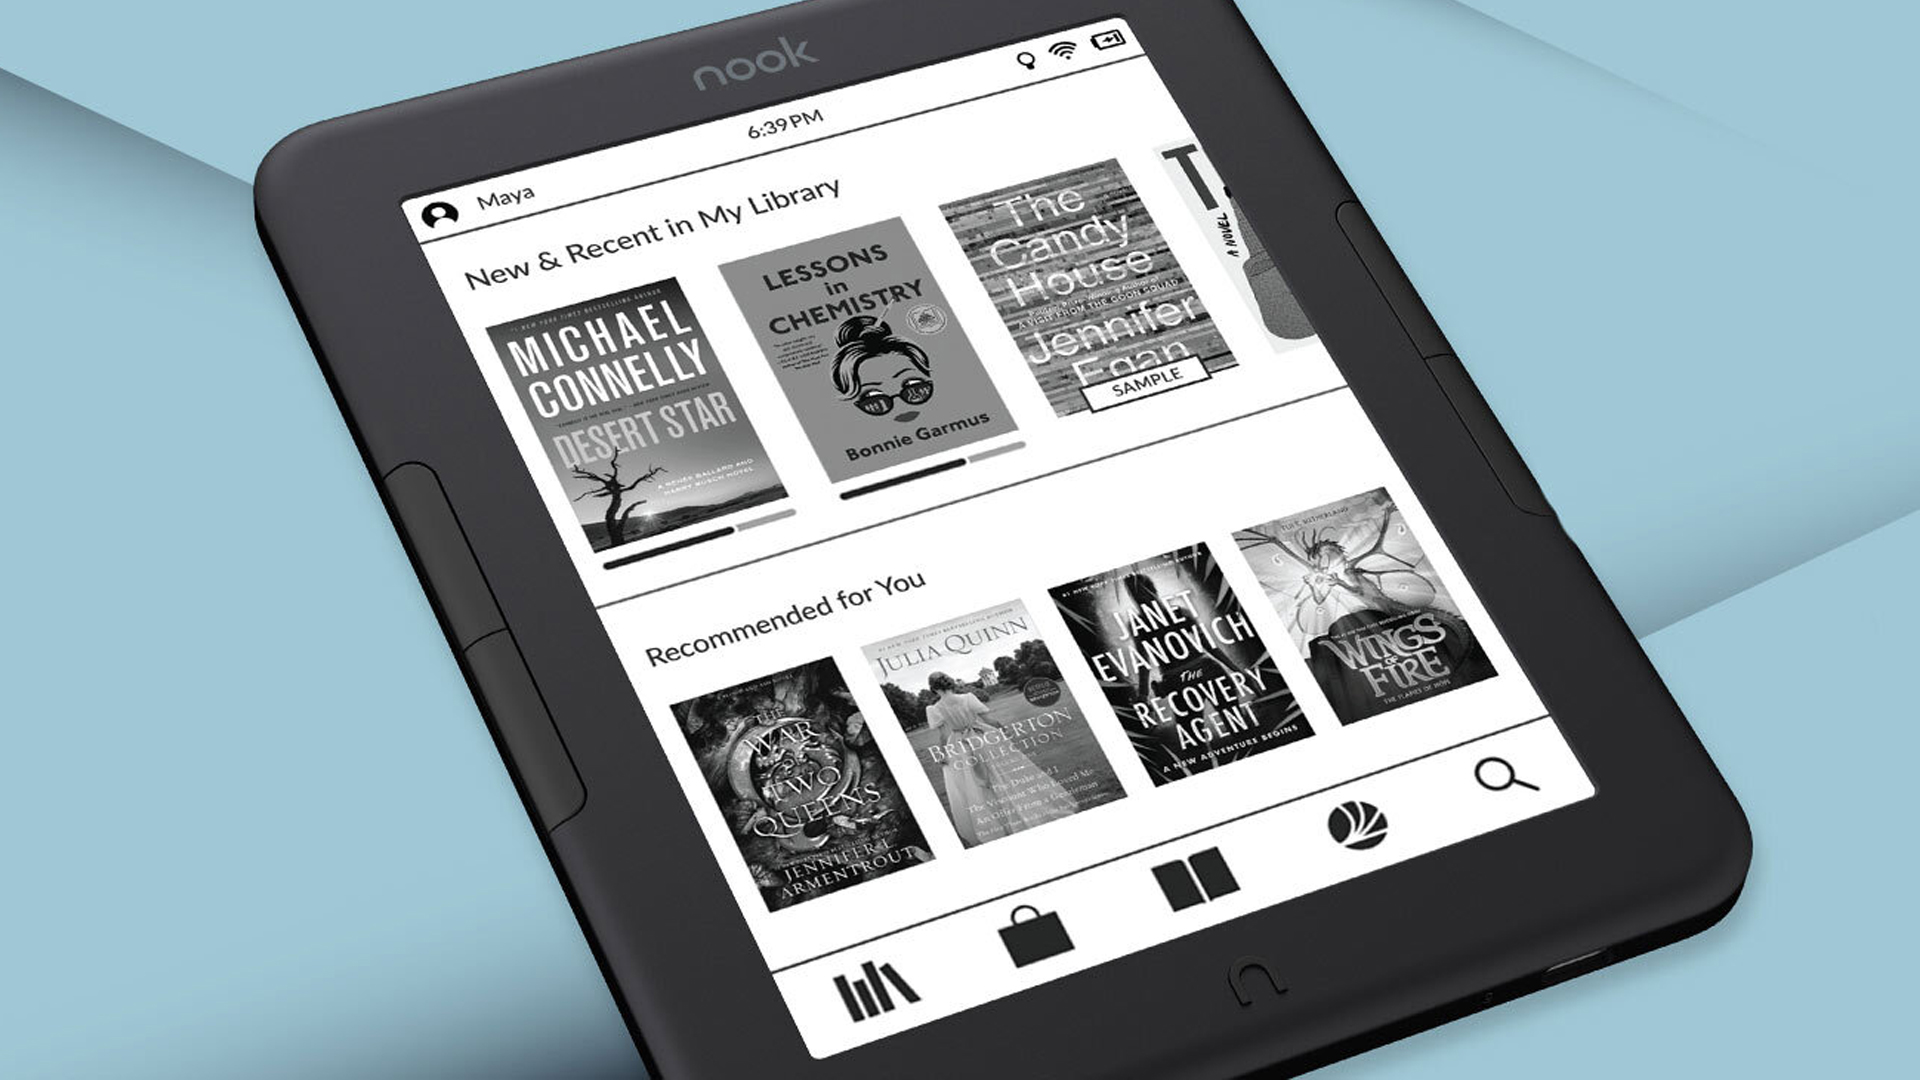 barnes-noble-s-new-nook-ereader-is-cheaper-but-with-tradeoffs-techradar